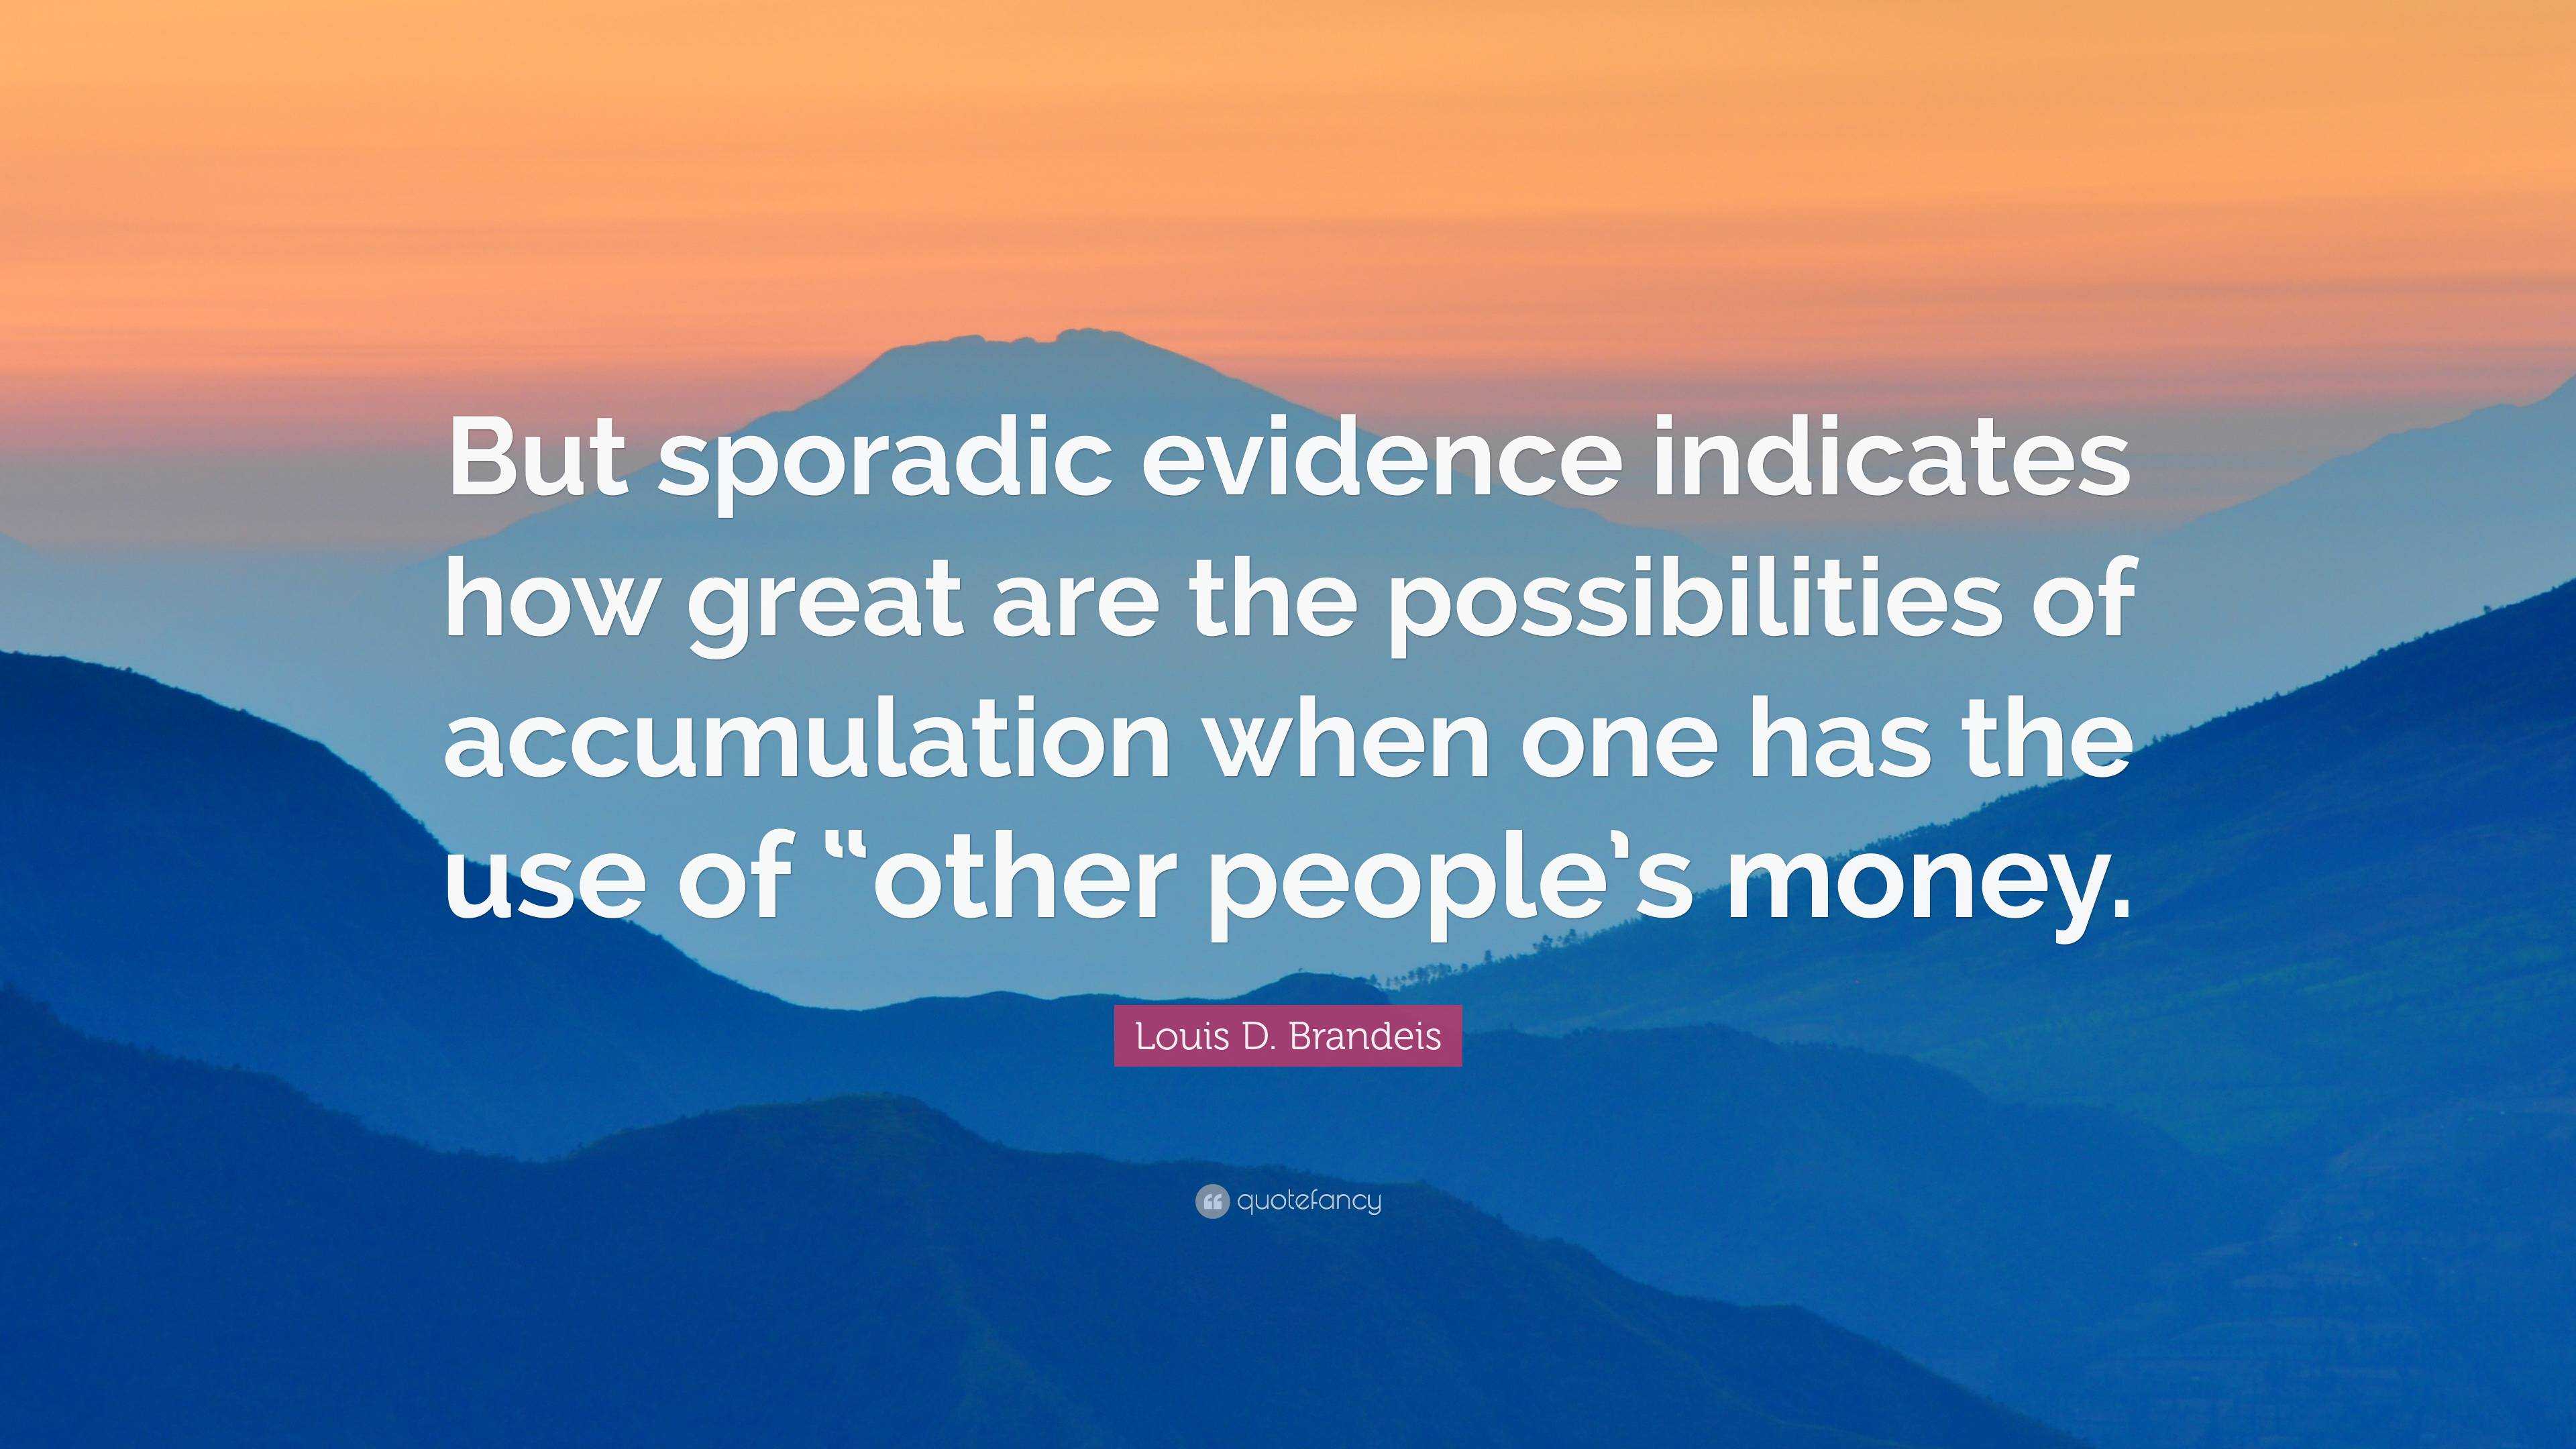 Louis D. Brandeis Quote: “But sporadic evidence indicates how great are the  possibilities of accumulation when one has the use of “other people's ”